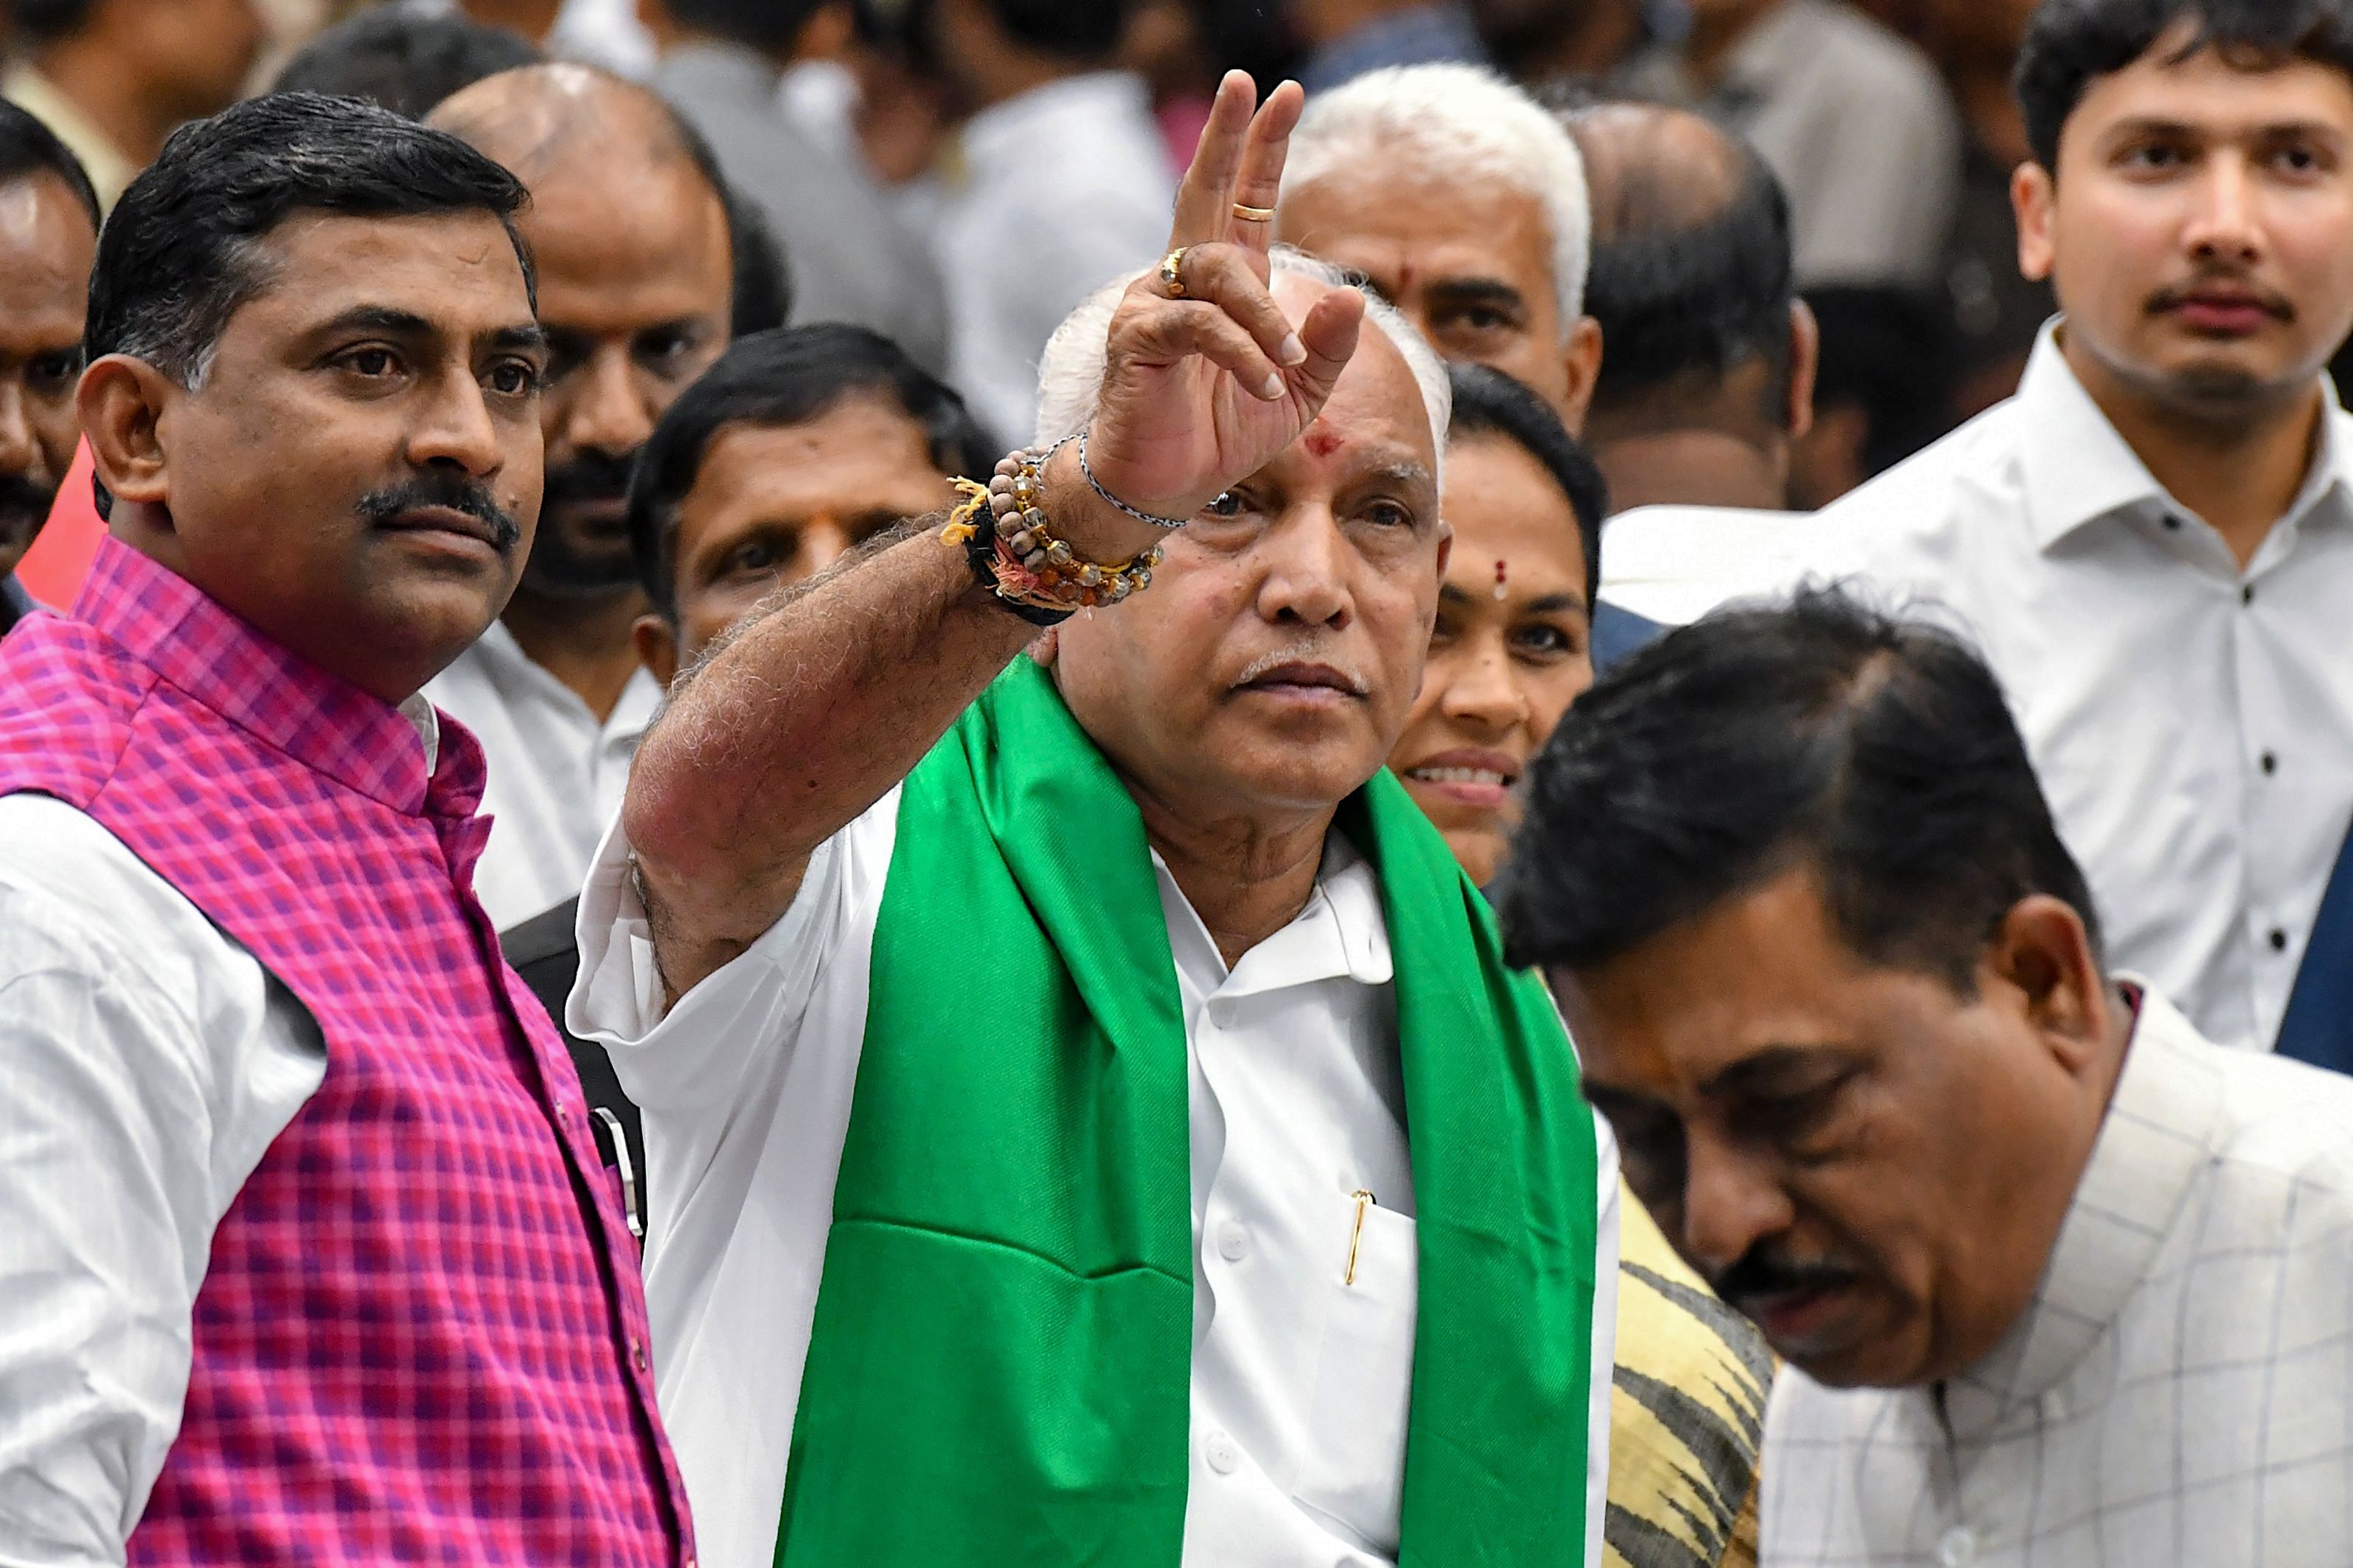 Senior leader of Bharatiya Janata Party (BJP), B.S. Yediyurappa (C), flashes the victory sign to his supporters and party workers prior to his swearing for the fourth time as the Karnataka Chief Minister. (AFP Photo)